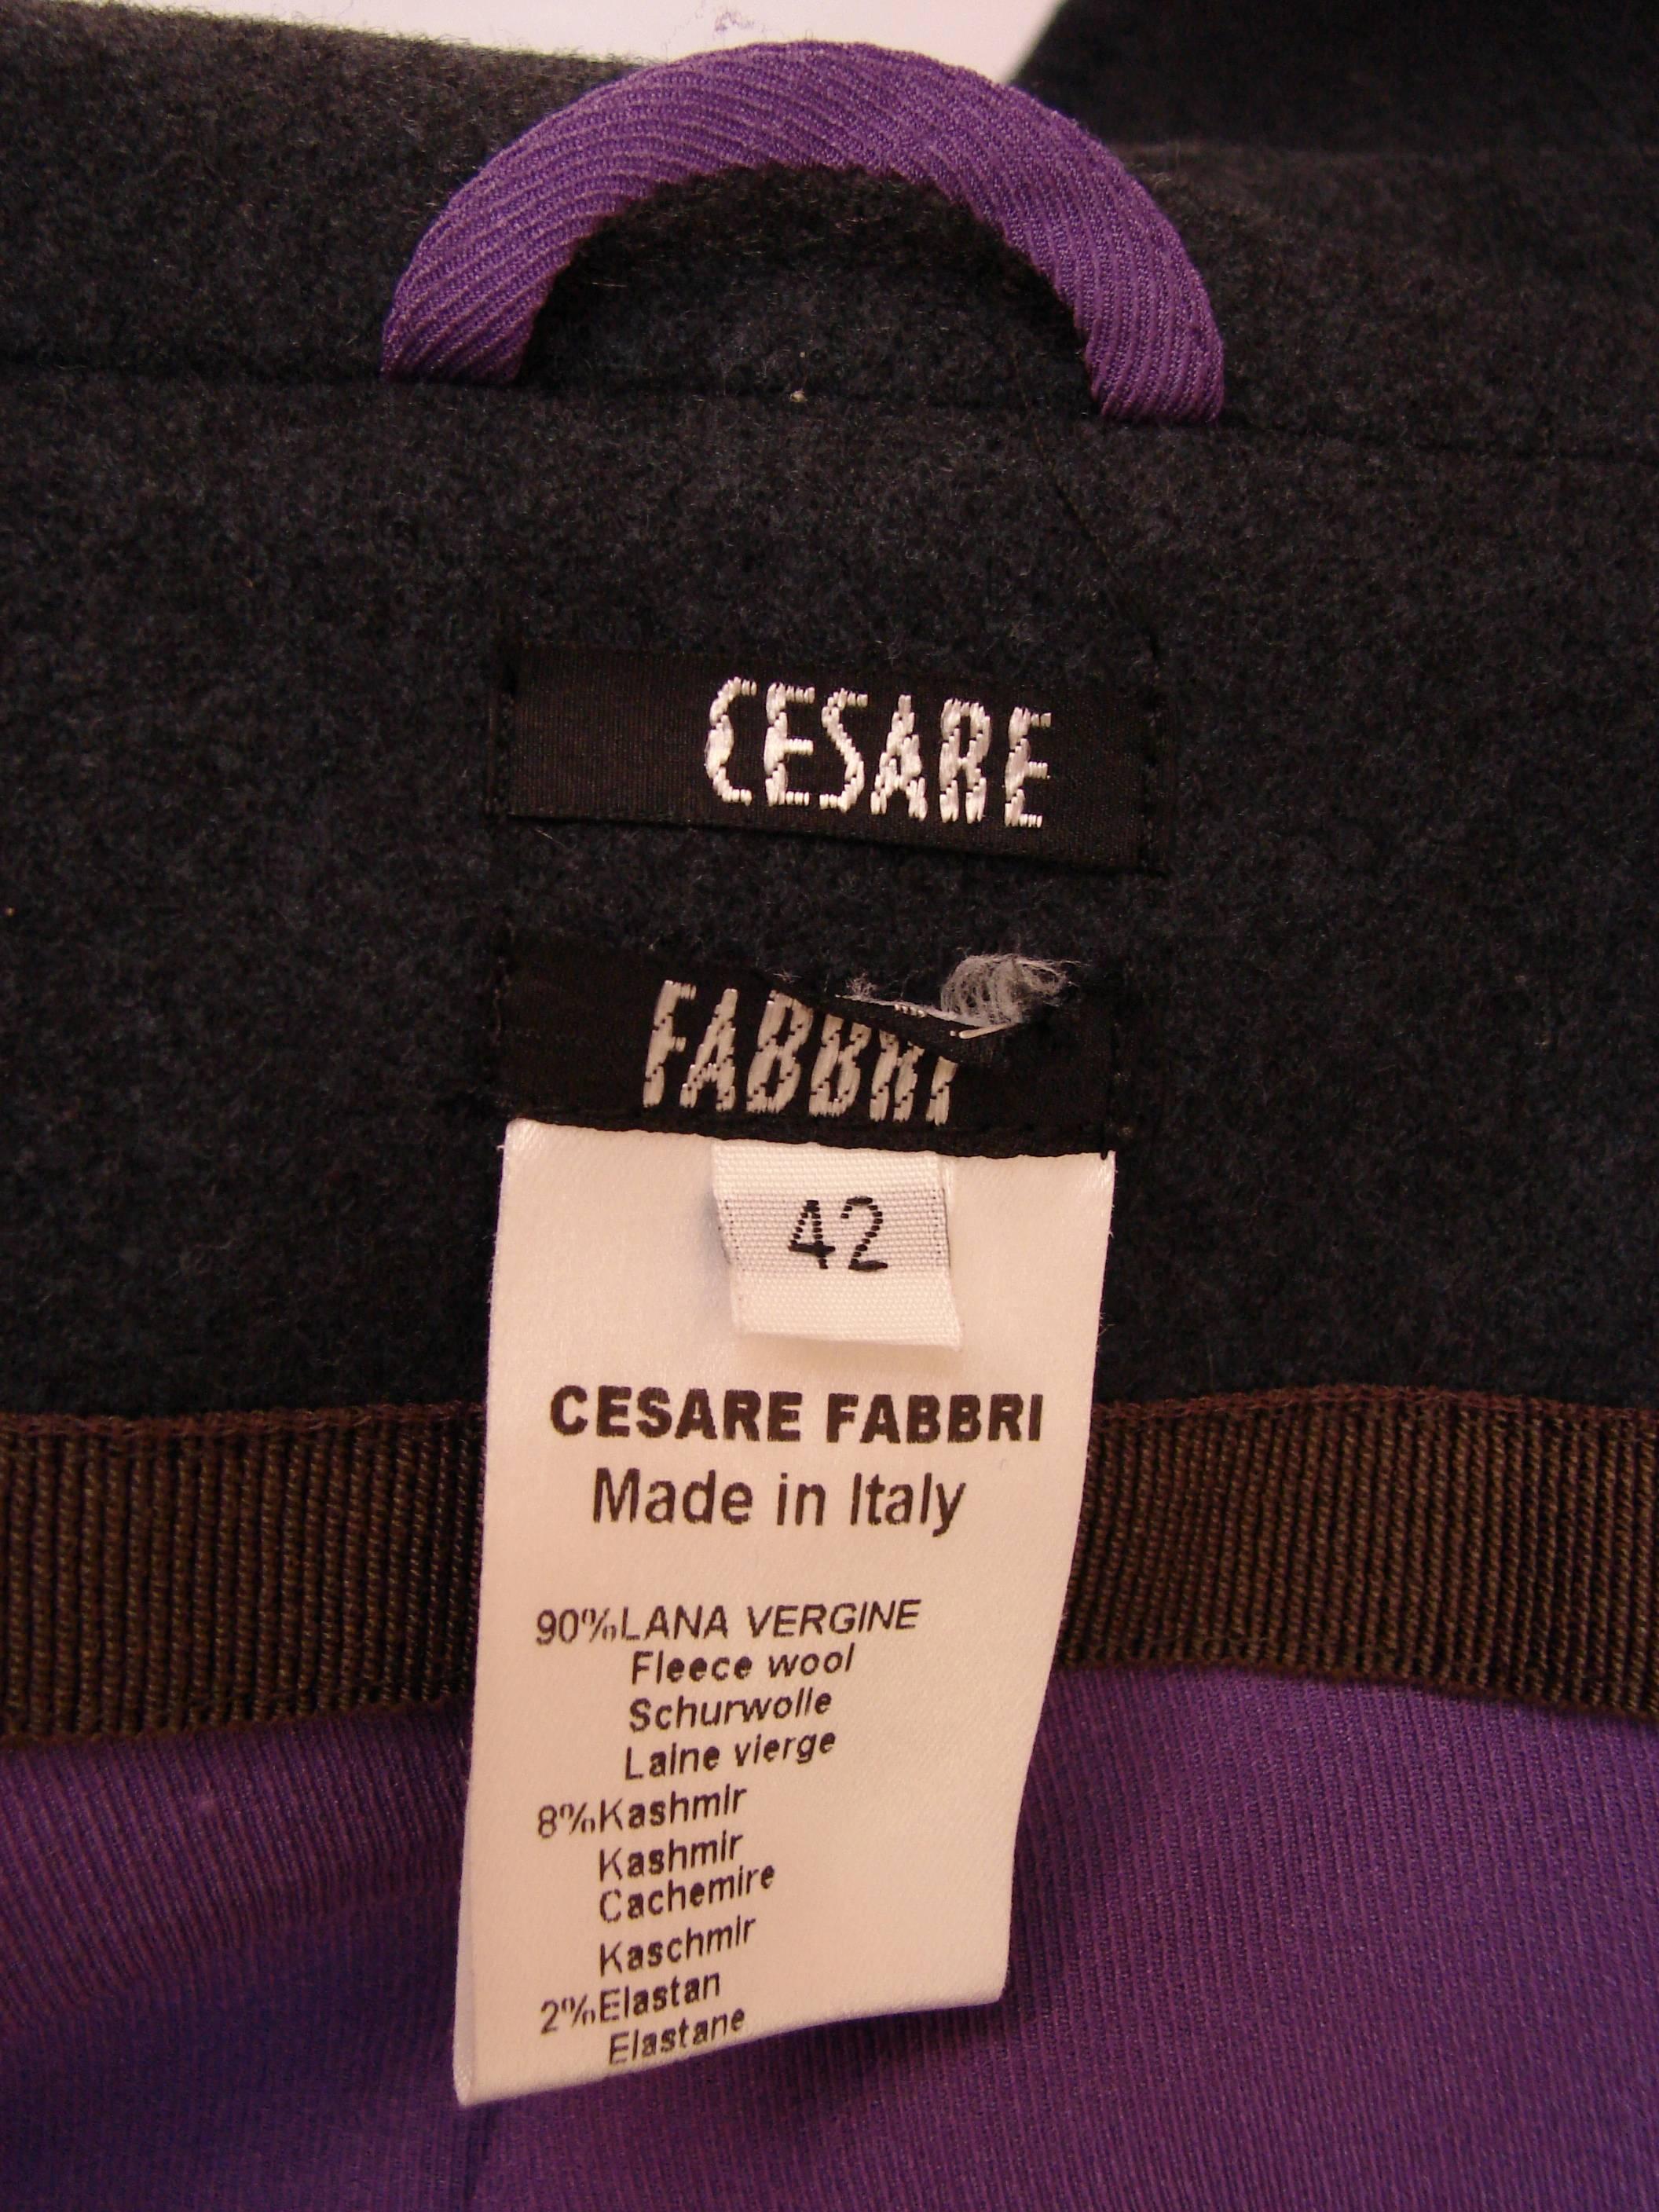 Cesare Fabbri Cashmere Wool Blend Jacket with Contrast Lining 1990s Sz 42 1